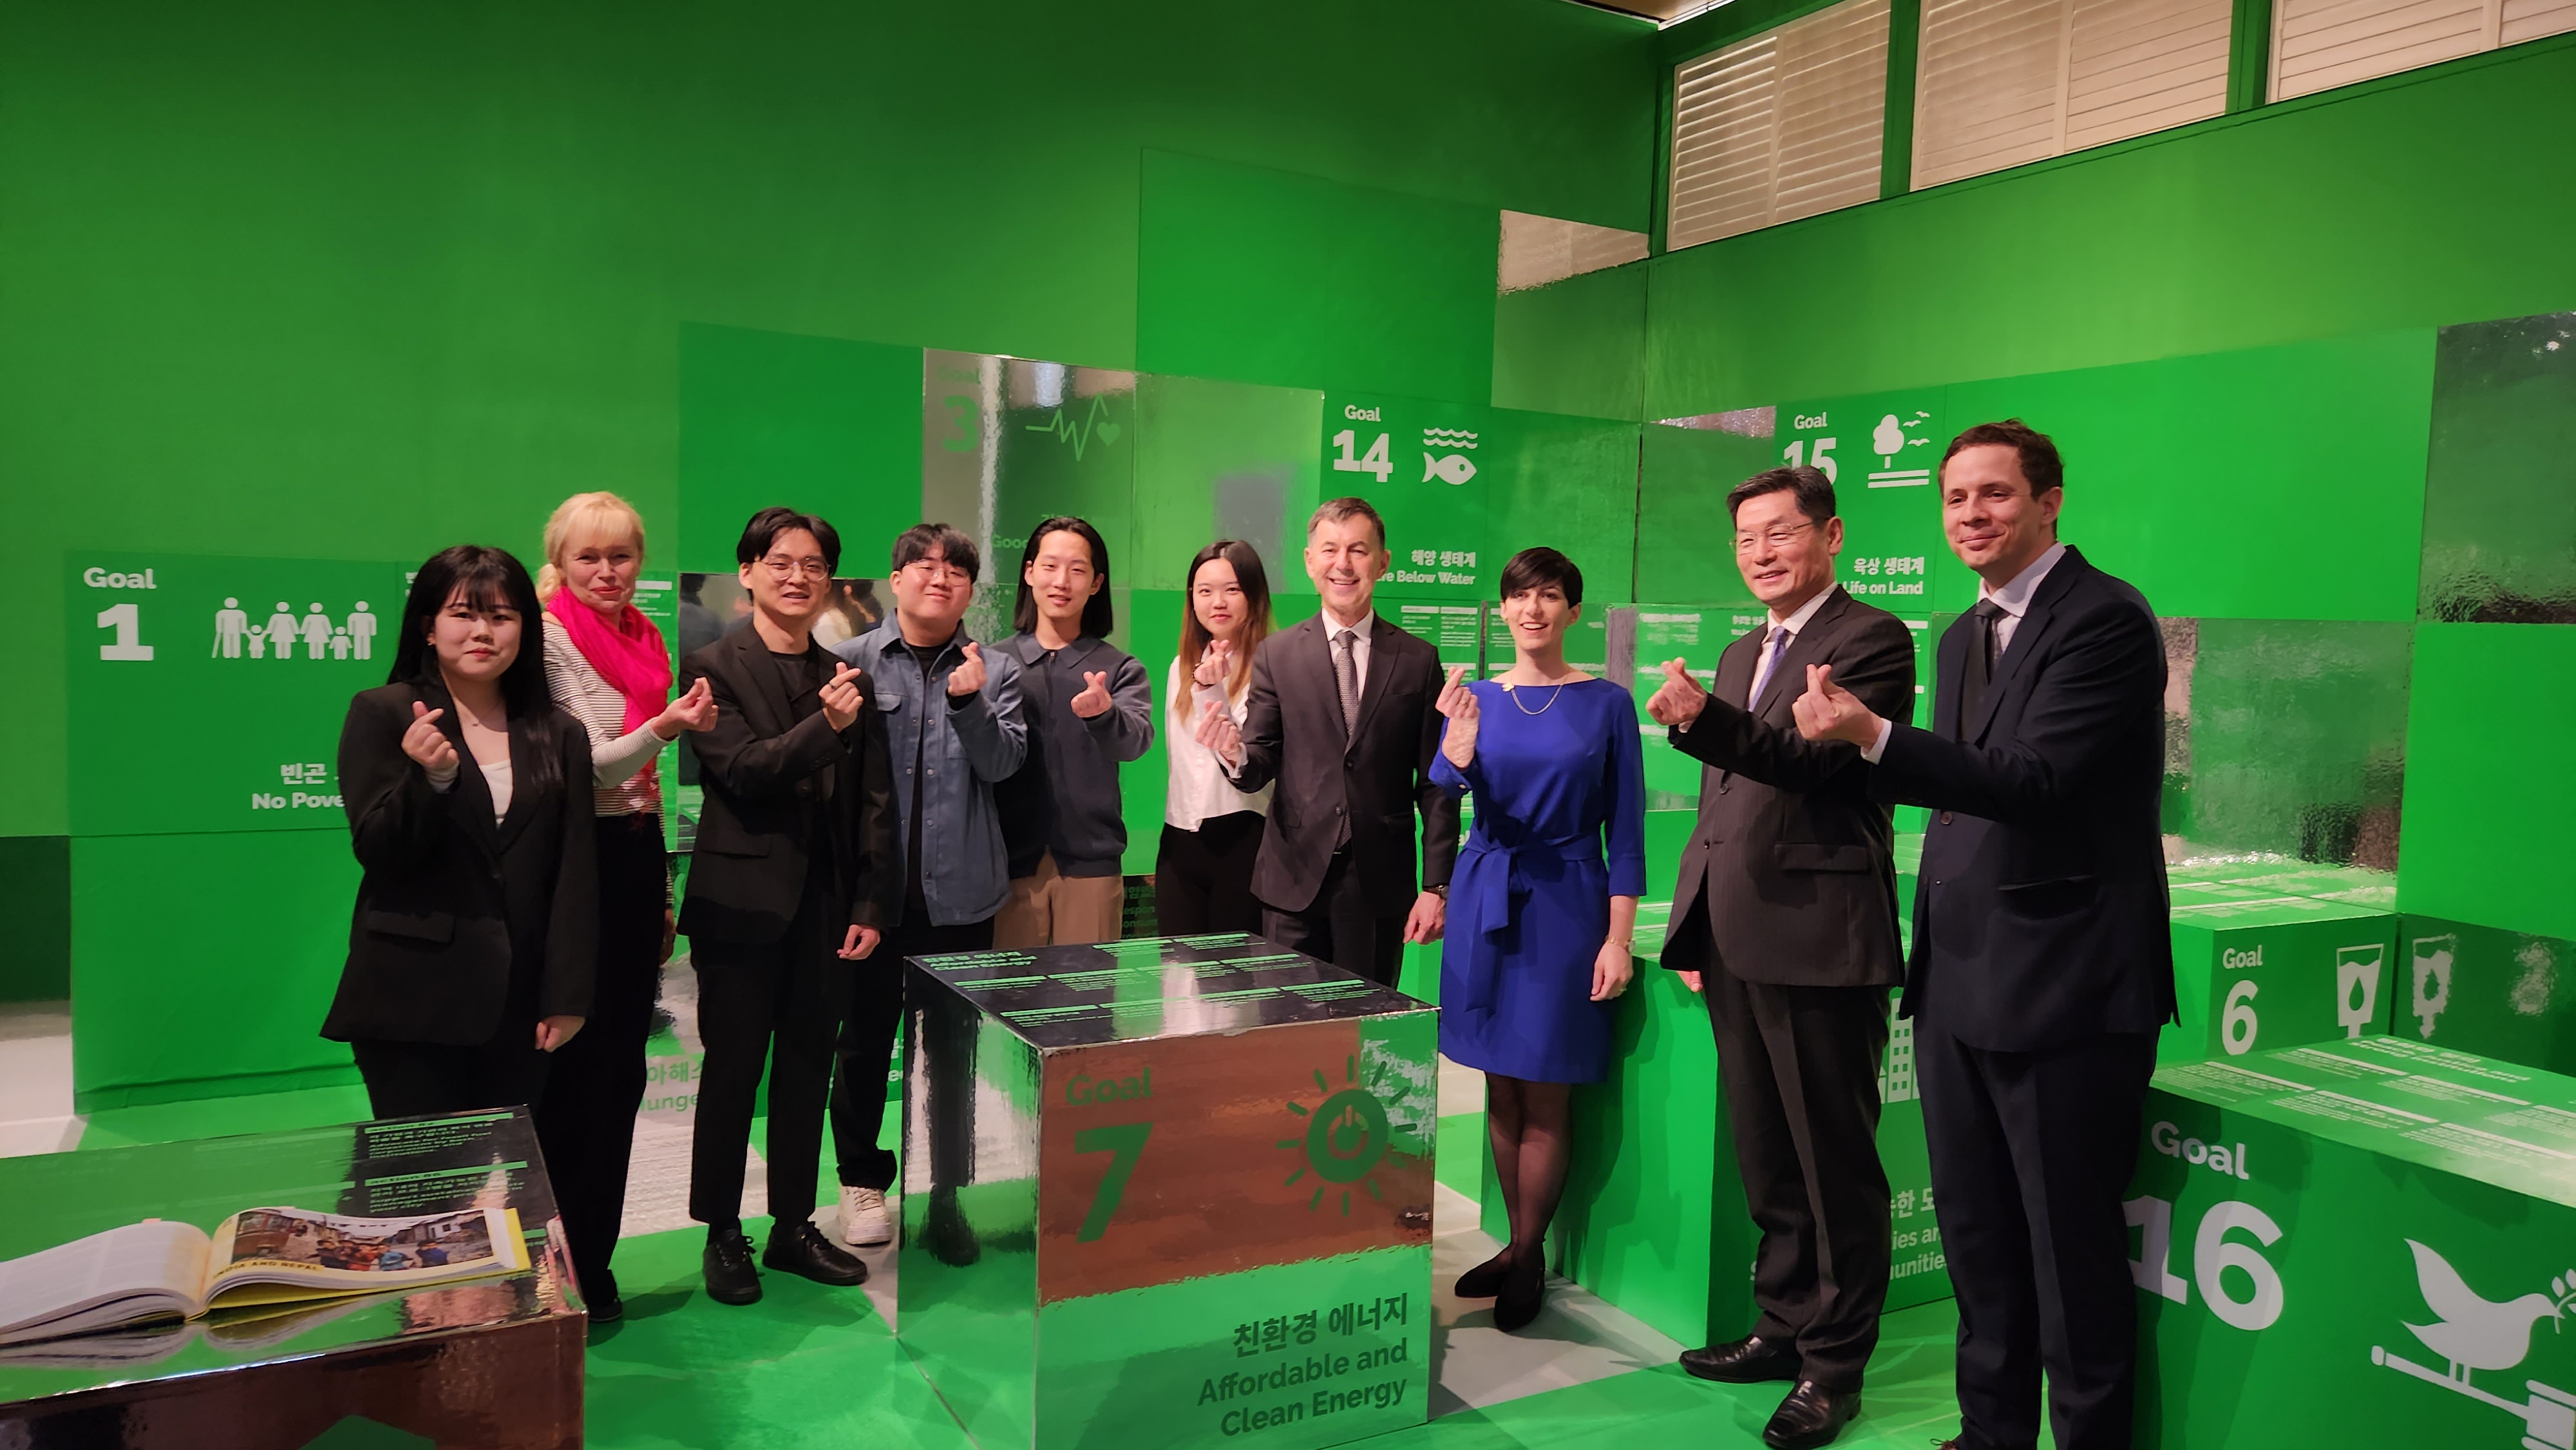 Czech Government and Parliamentary Delegation to Korea Visited “Towards the Day After Today” Exhibition at KF Gallery 